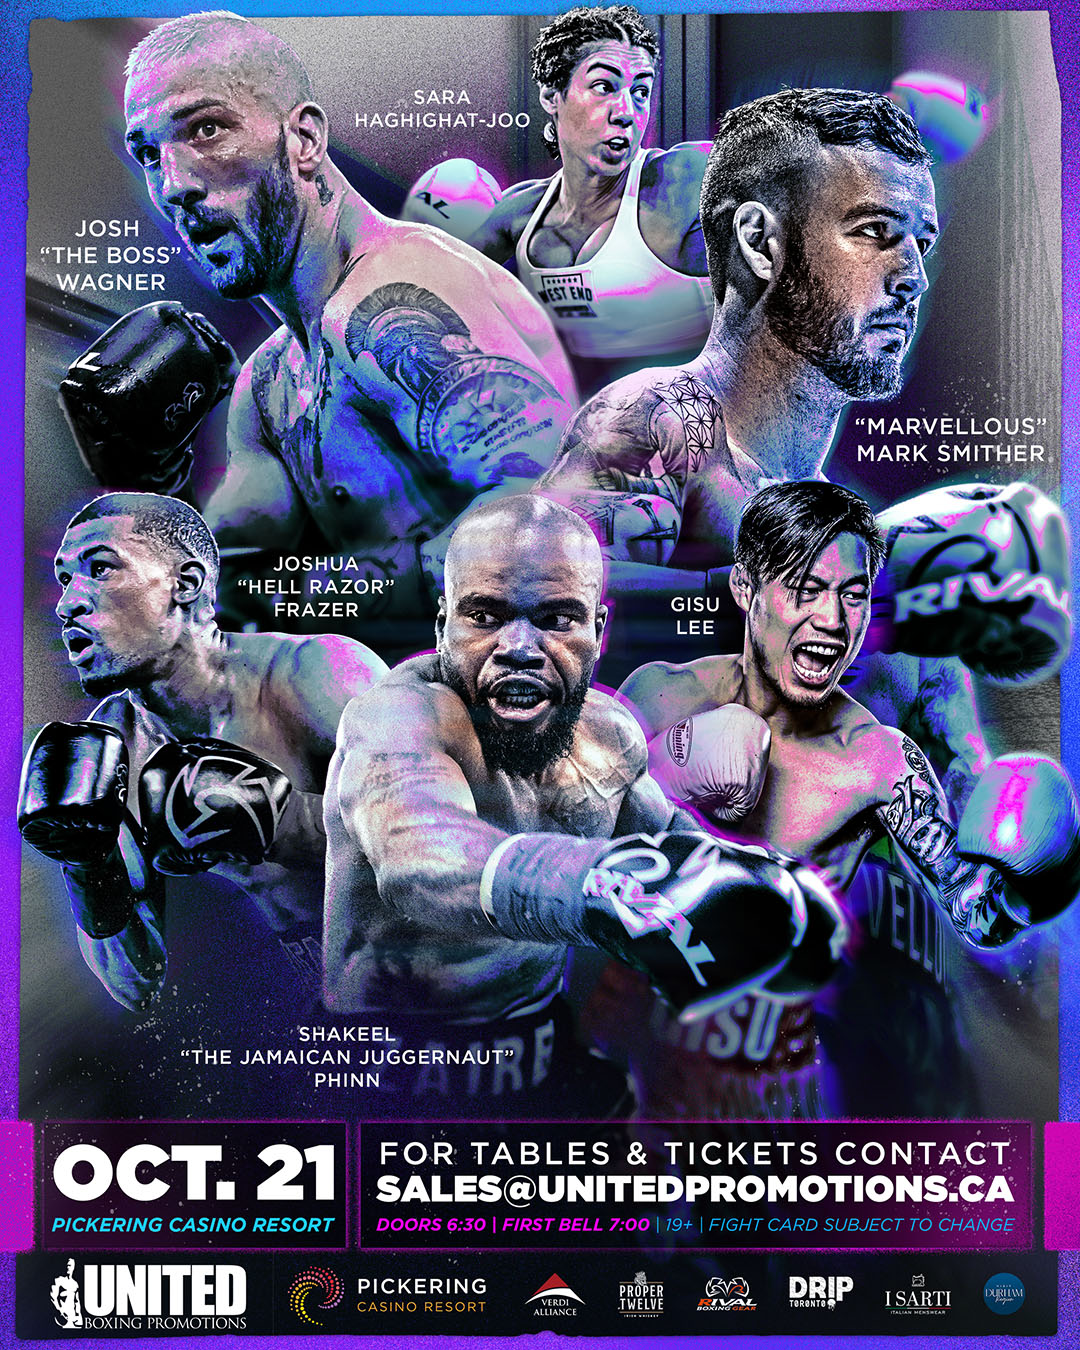 Live Professional Boxing at Pickering Casino - 23.10.21